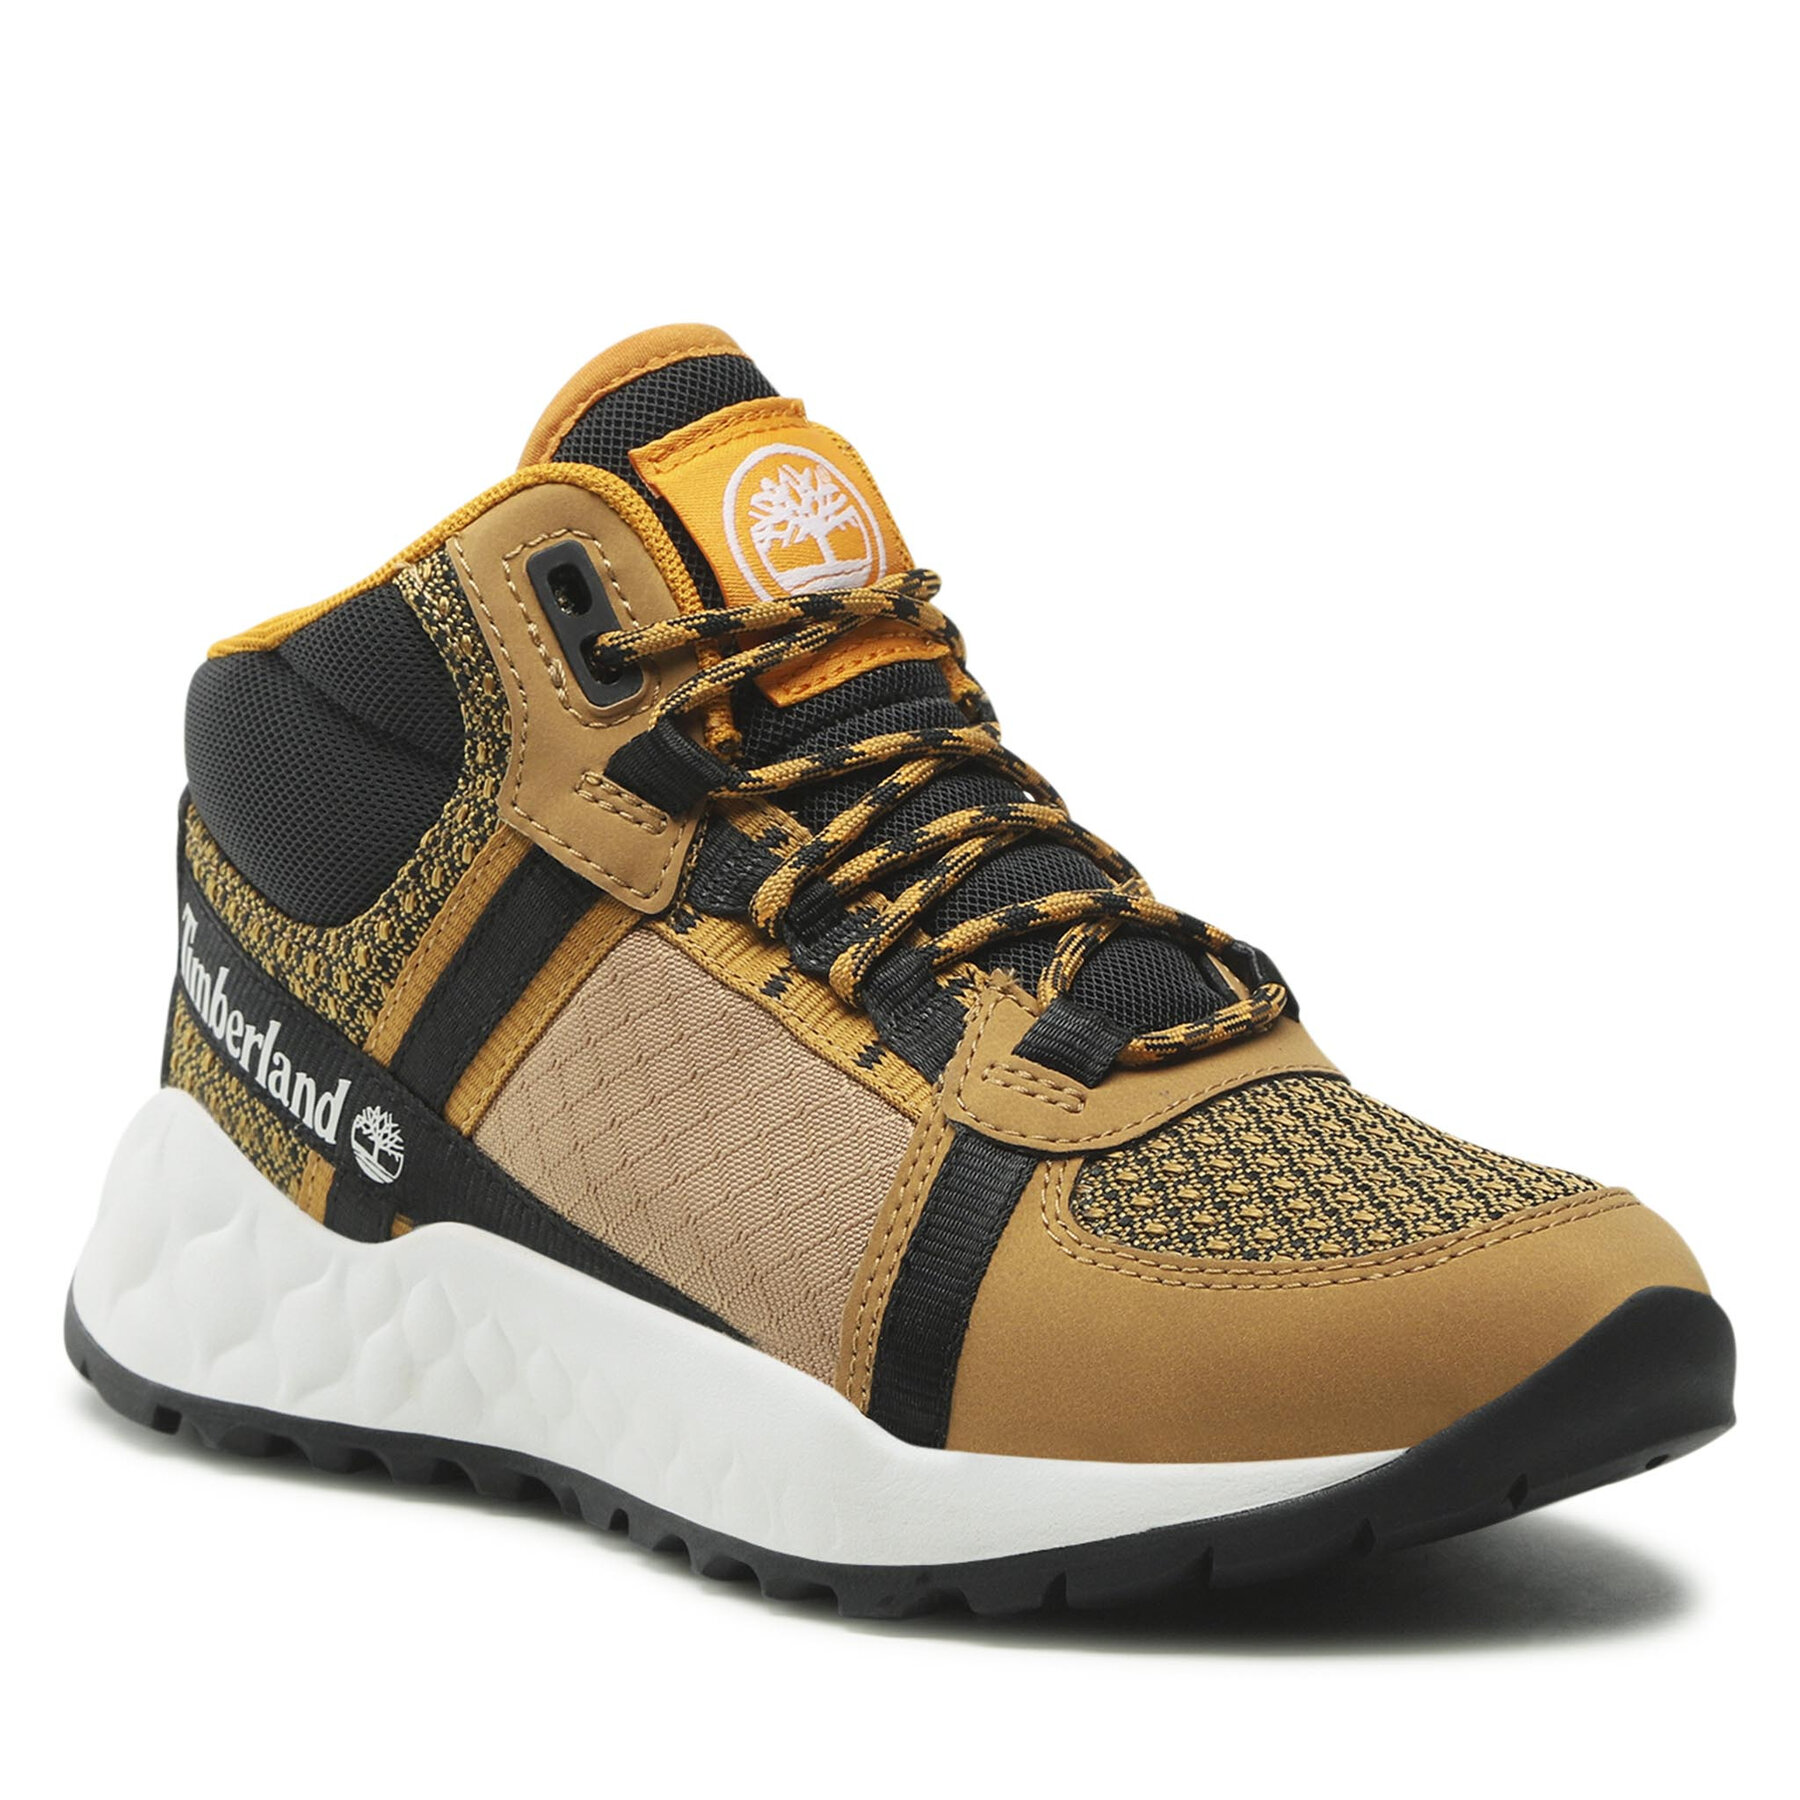 Sneakers Timberland Solar Wave Lt Mid TB0A437K231 Wheat Mesh